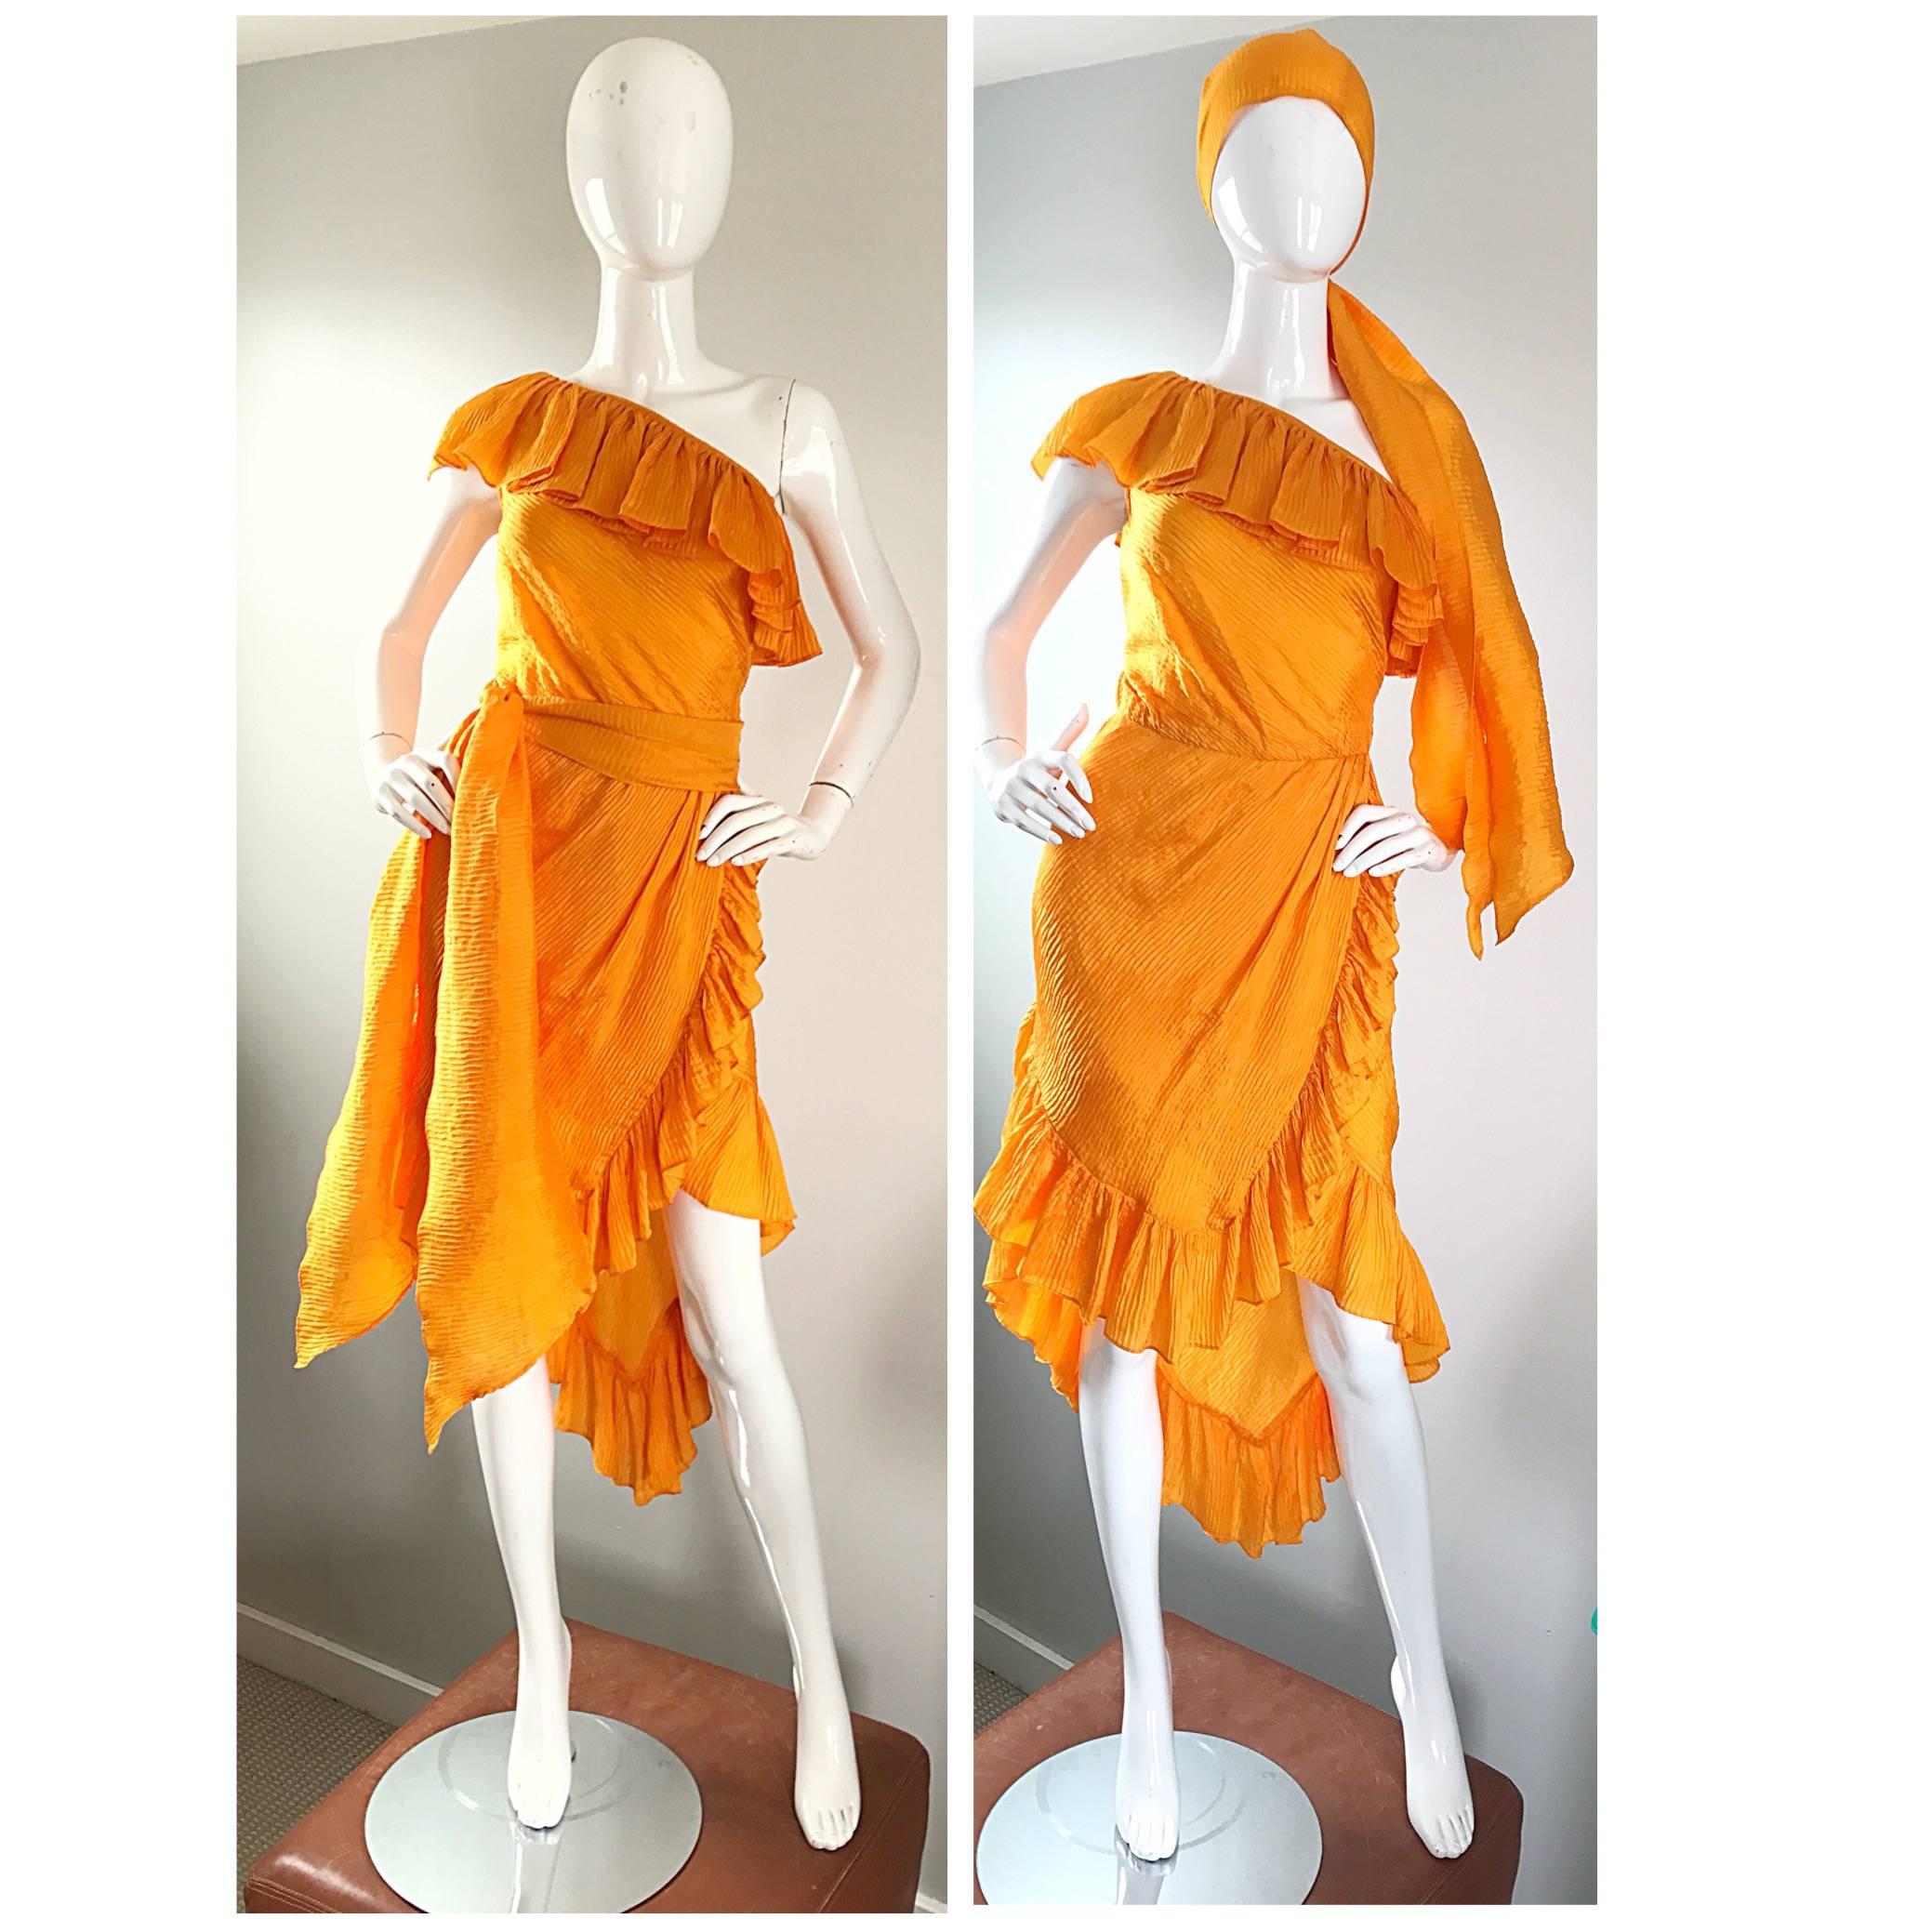 Rare late 70s vintage YSL Rive Gauche one shoulder silk tangerine marigold dress and sash! Luxurious silk plisse feels great against the skin. Features ruffles throughout, and the skirt has a handkerchief hem that is longer in the back. Would look